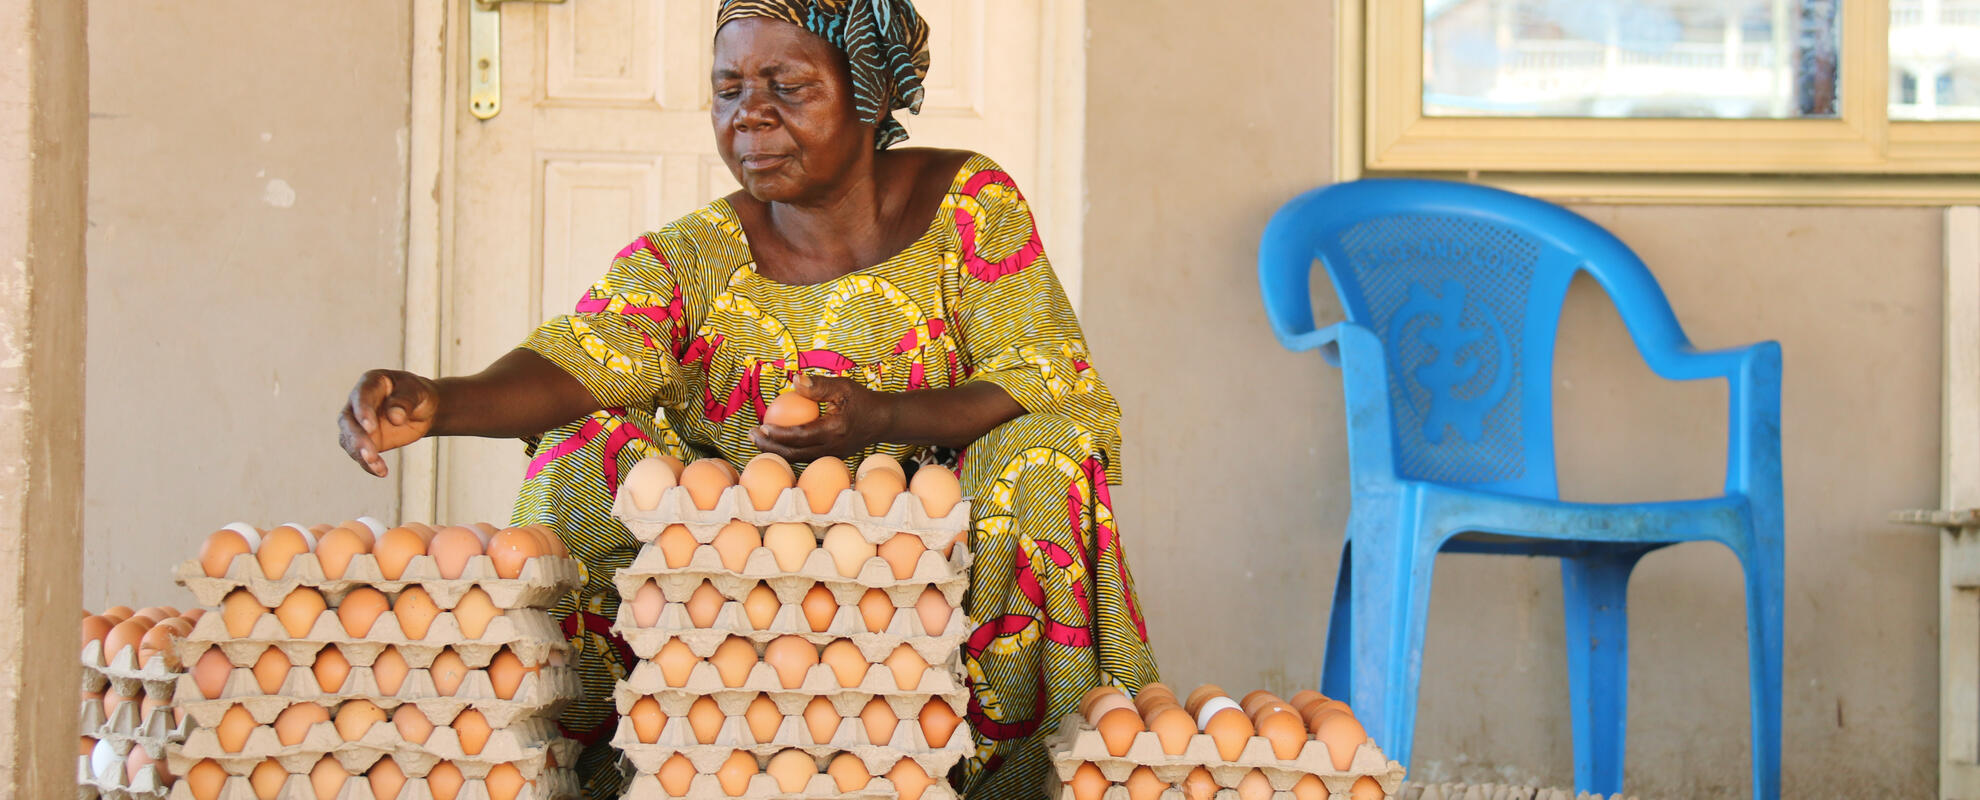 Woman working with eggs